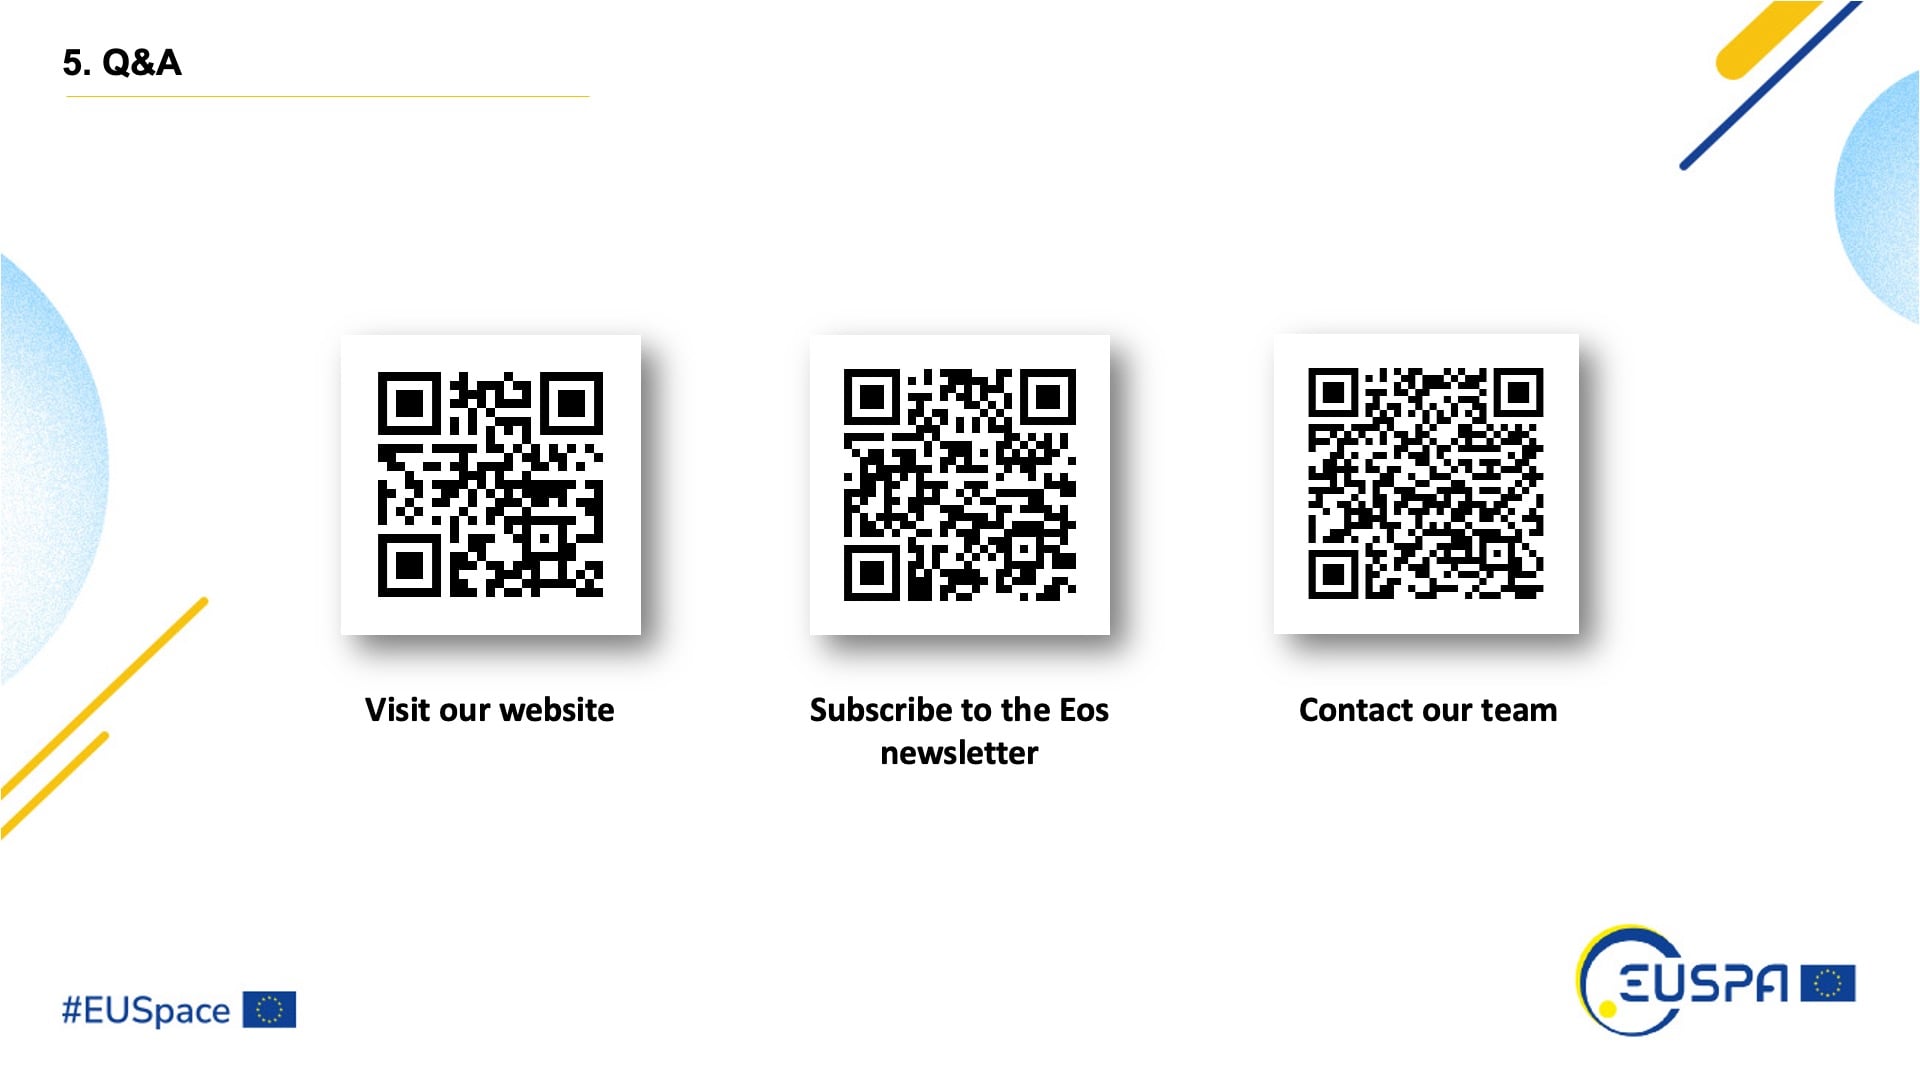 Learn more about Eos Positioning Systems' website, newsletter, and technical support by scanning the QR codes